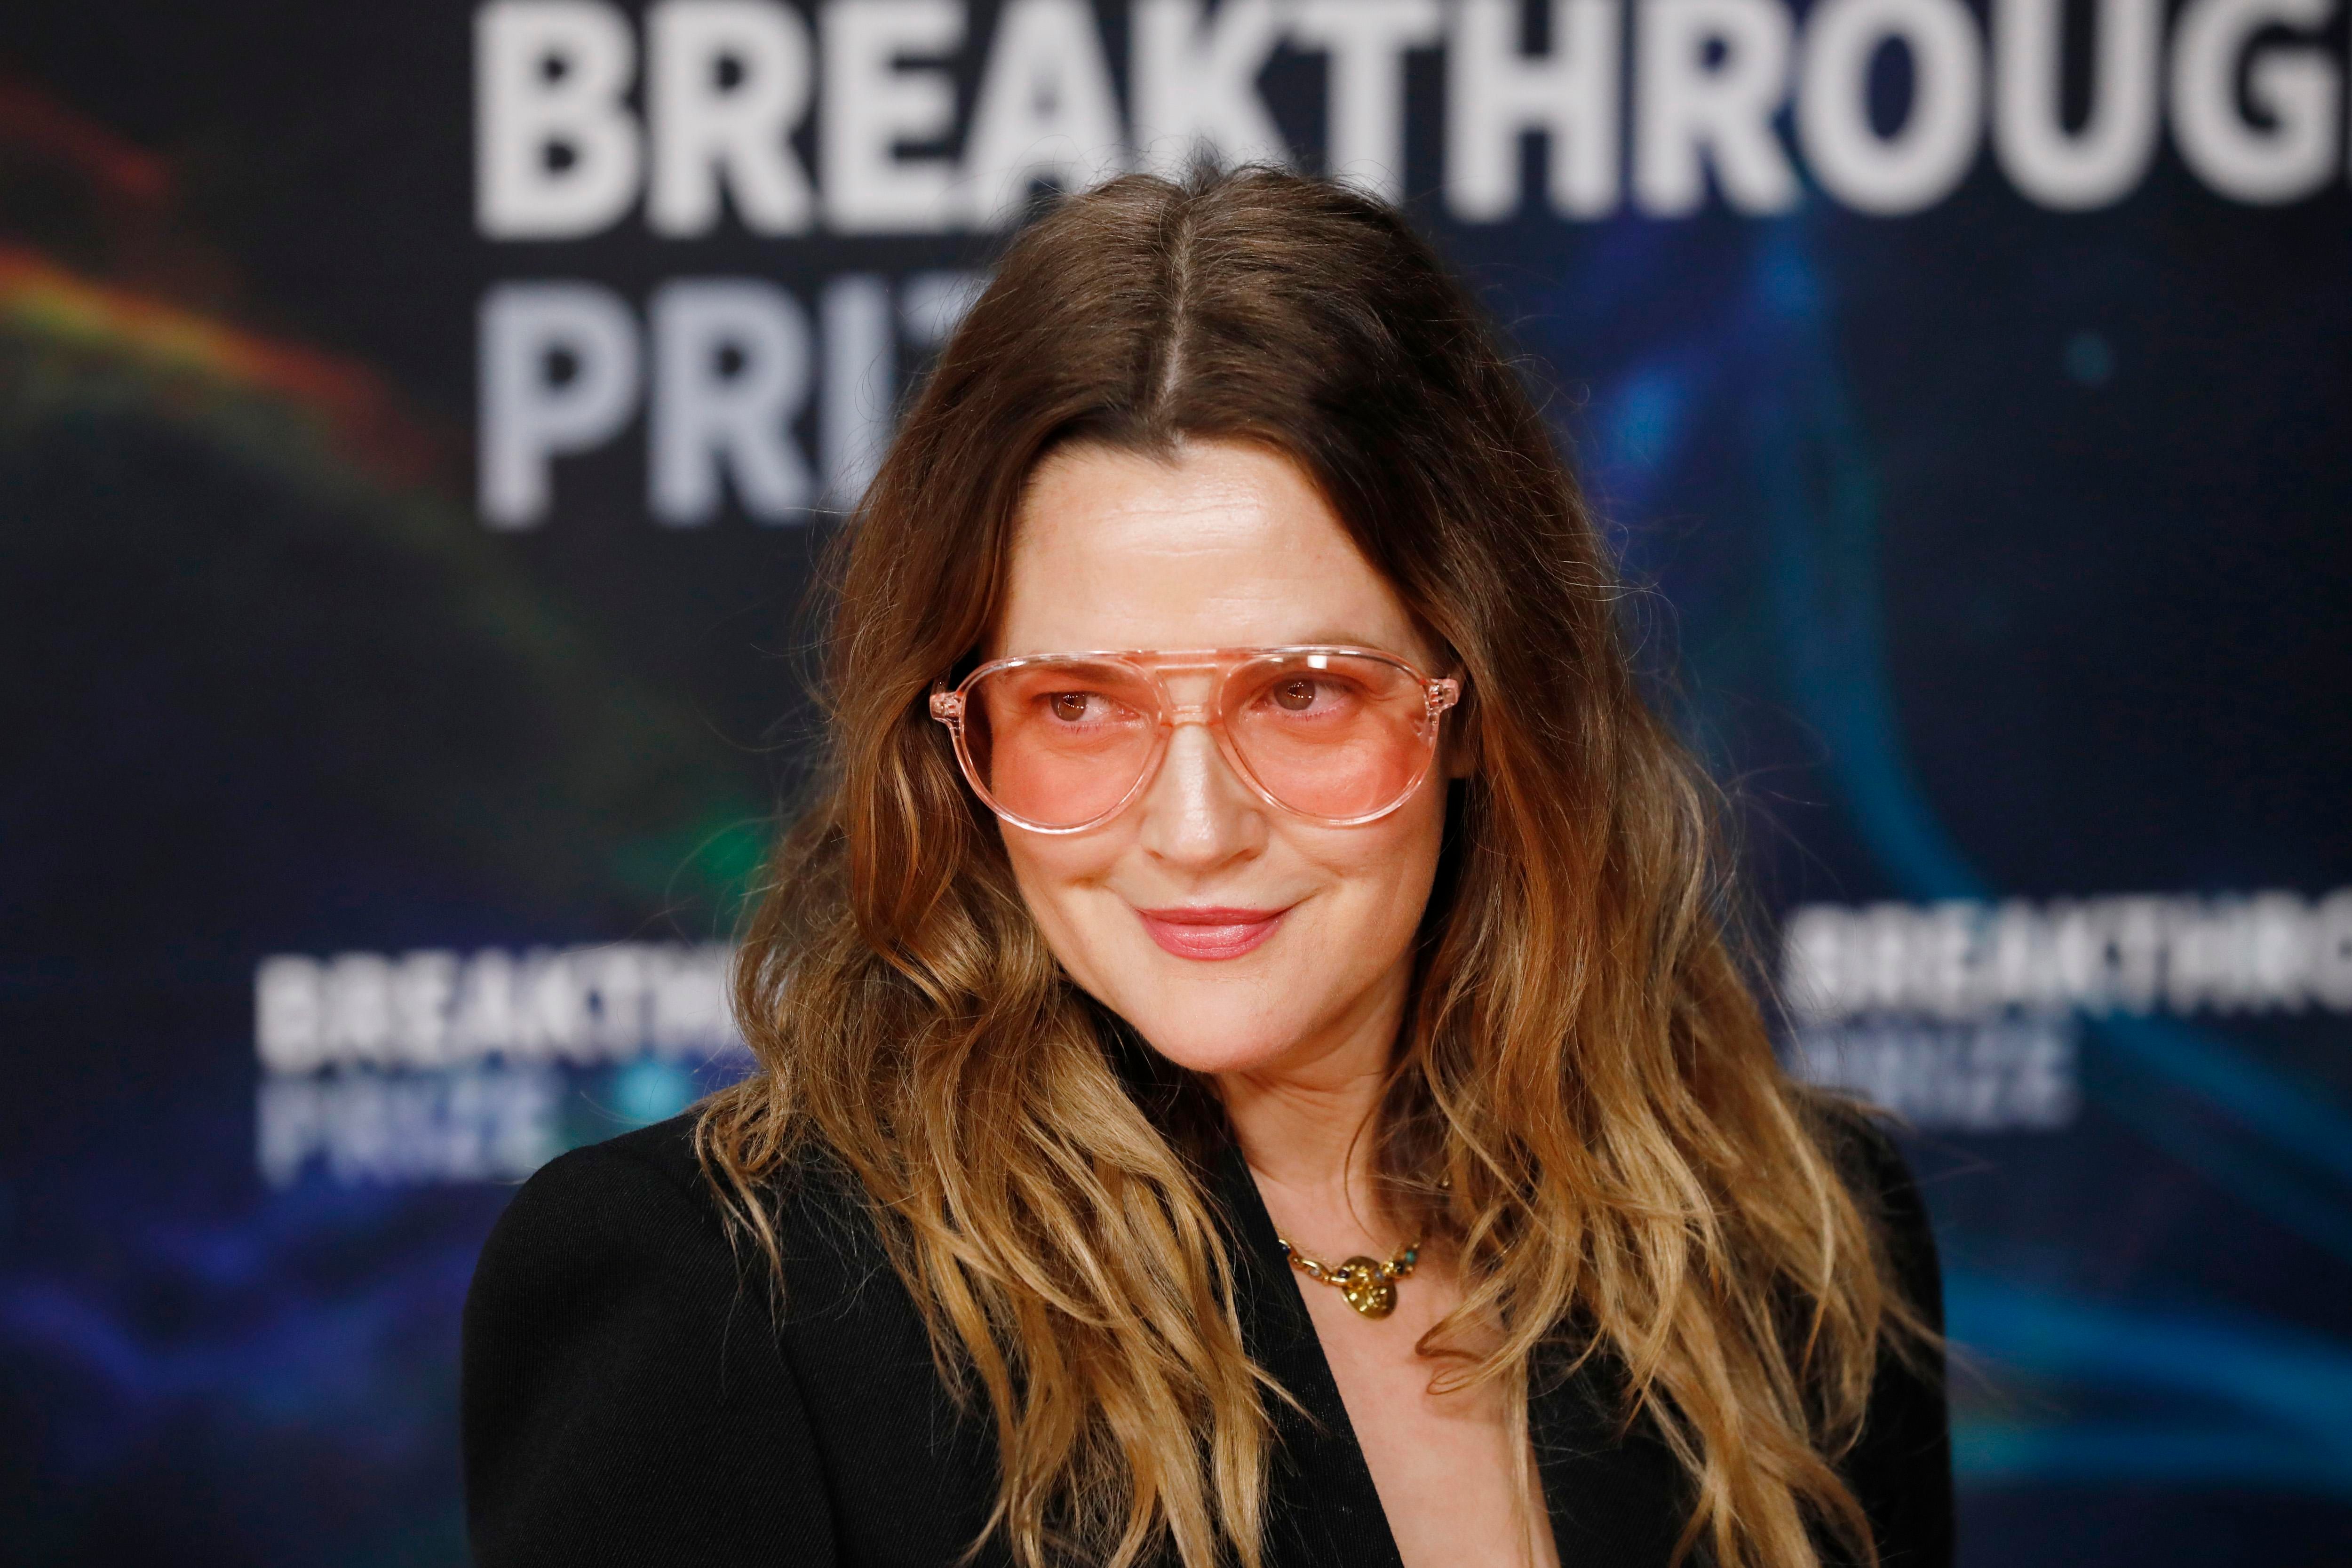 Drew Barrymore at the 2020 Breakthrough Prize Ceremony in California on November 3, 2019 | Getty Images 